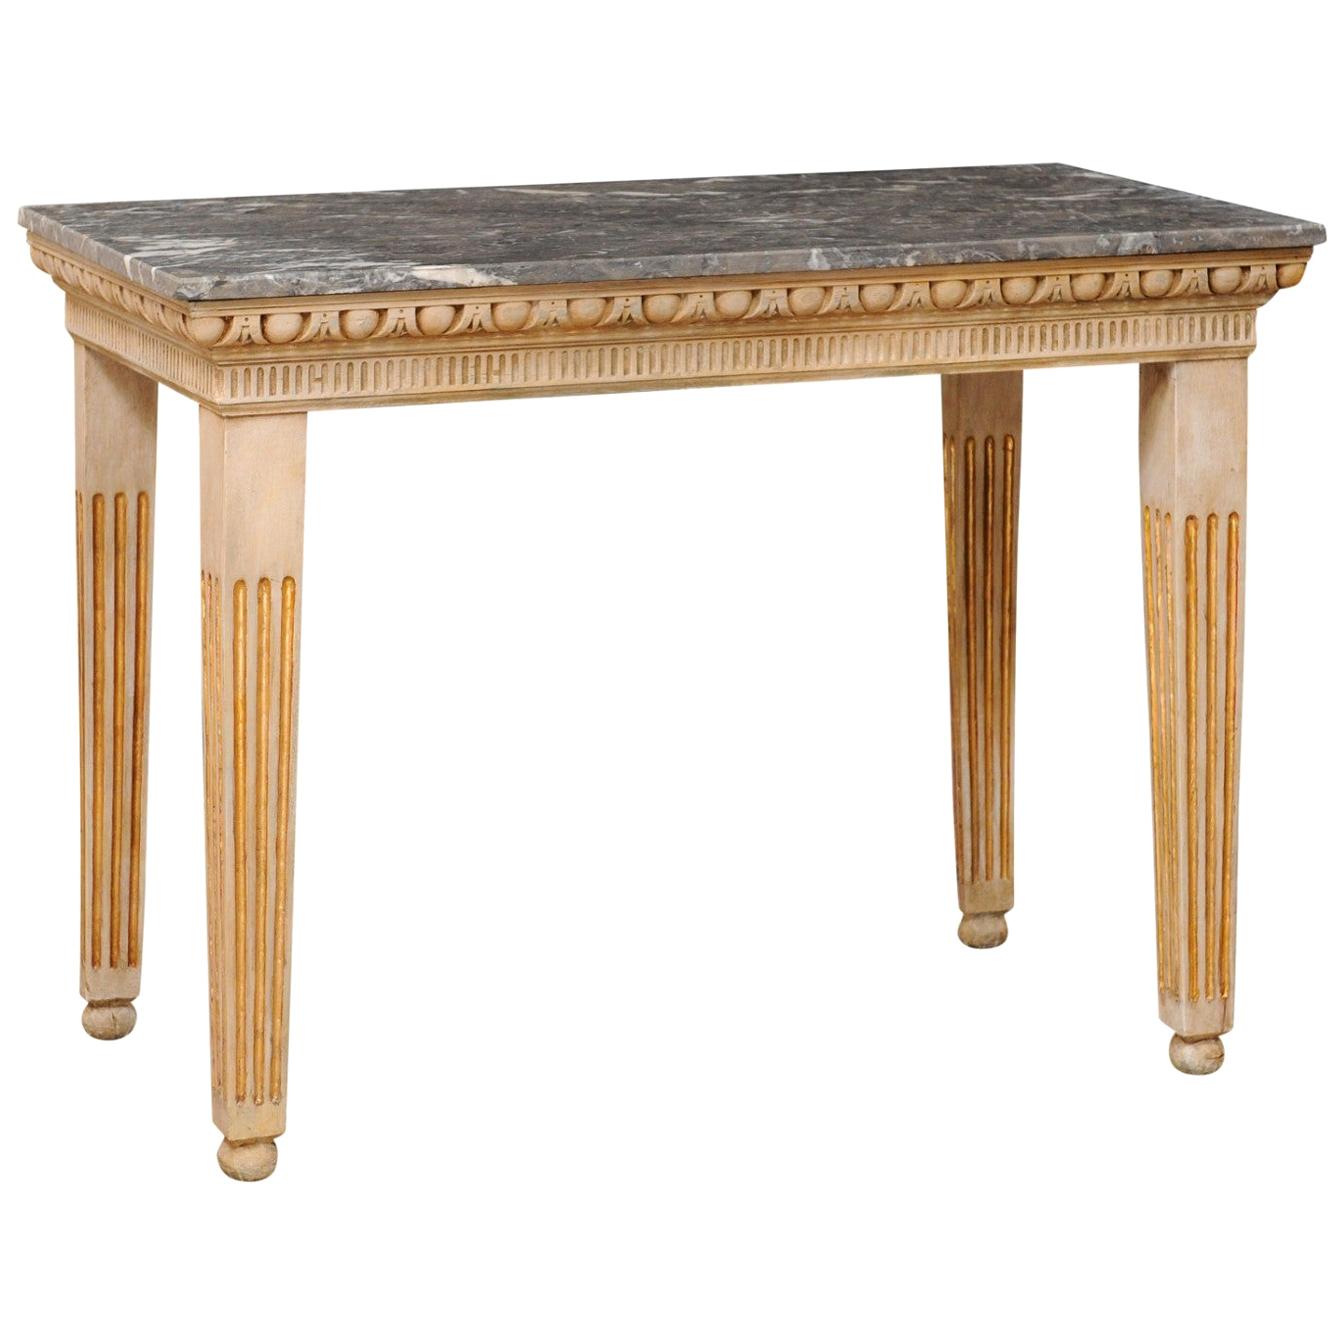 Vintage Marble-Top Console Table with Egg-n-Dart & Fluted Carved Embellishments